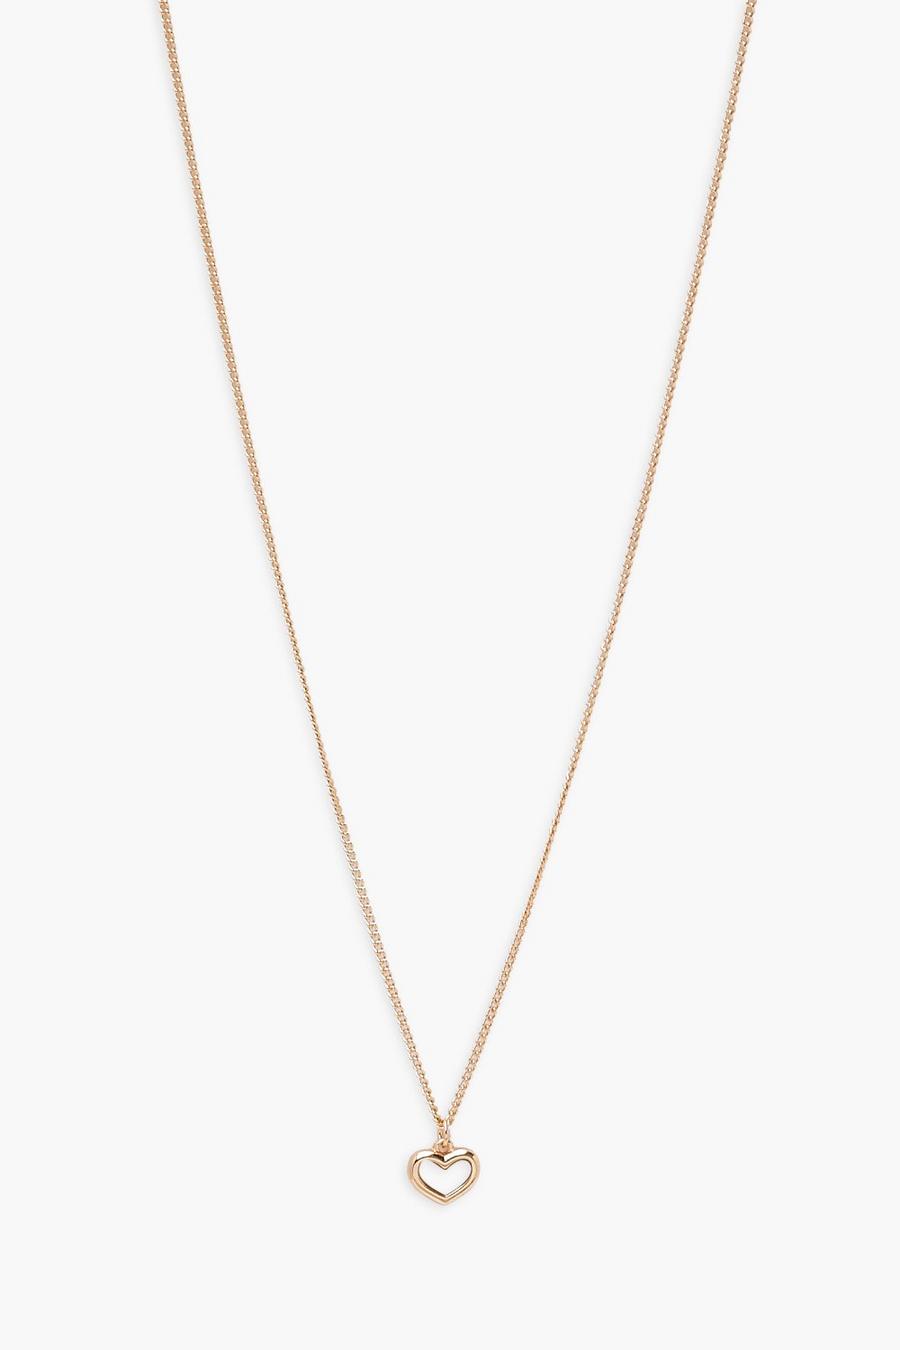 Gold Simple Small Heart Chain Necklace